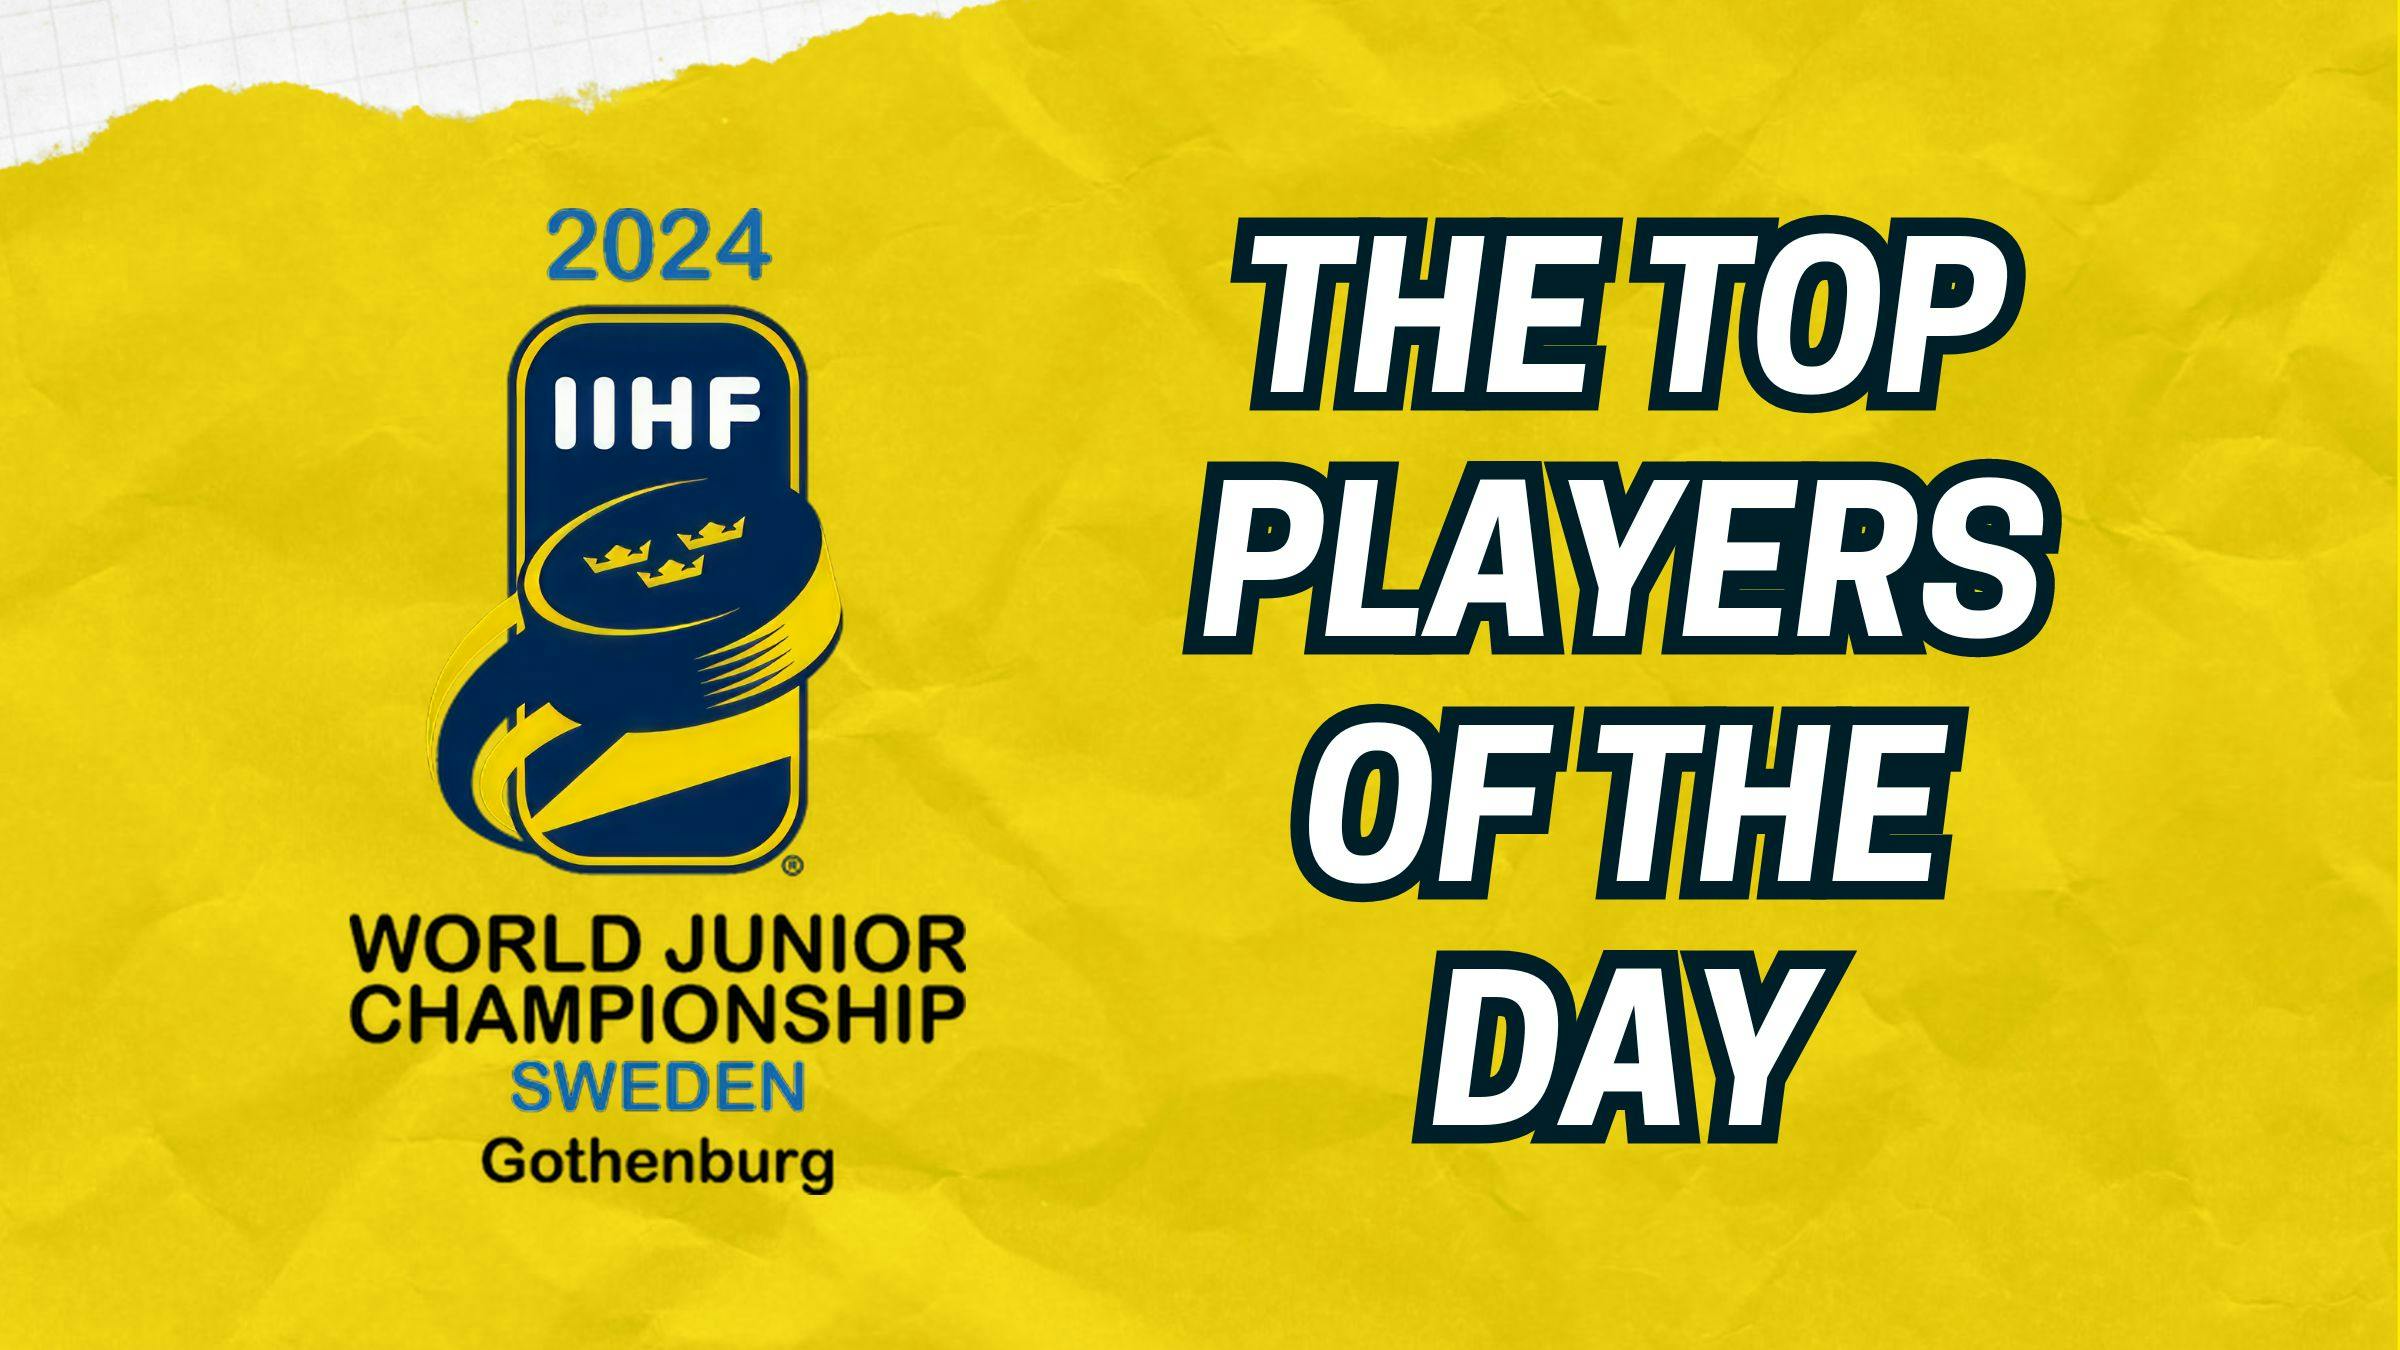 Top players from Day 2 of the 2024 World Junior Championship Daily